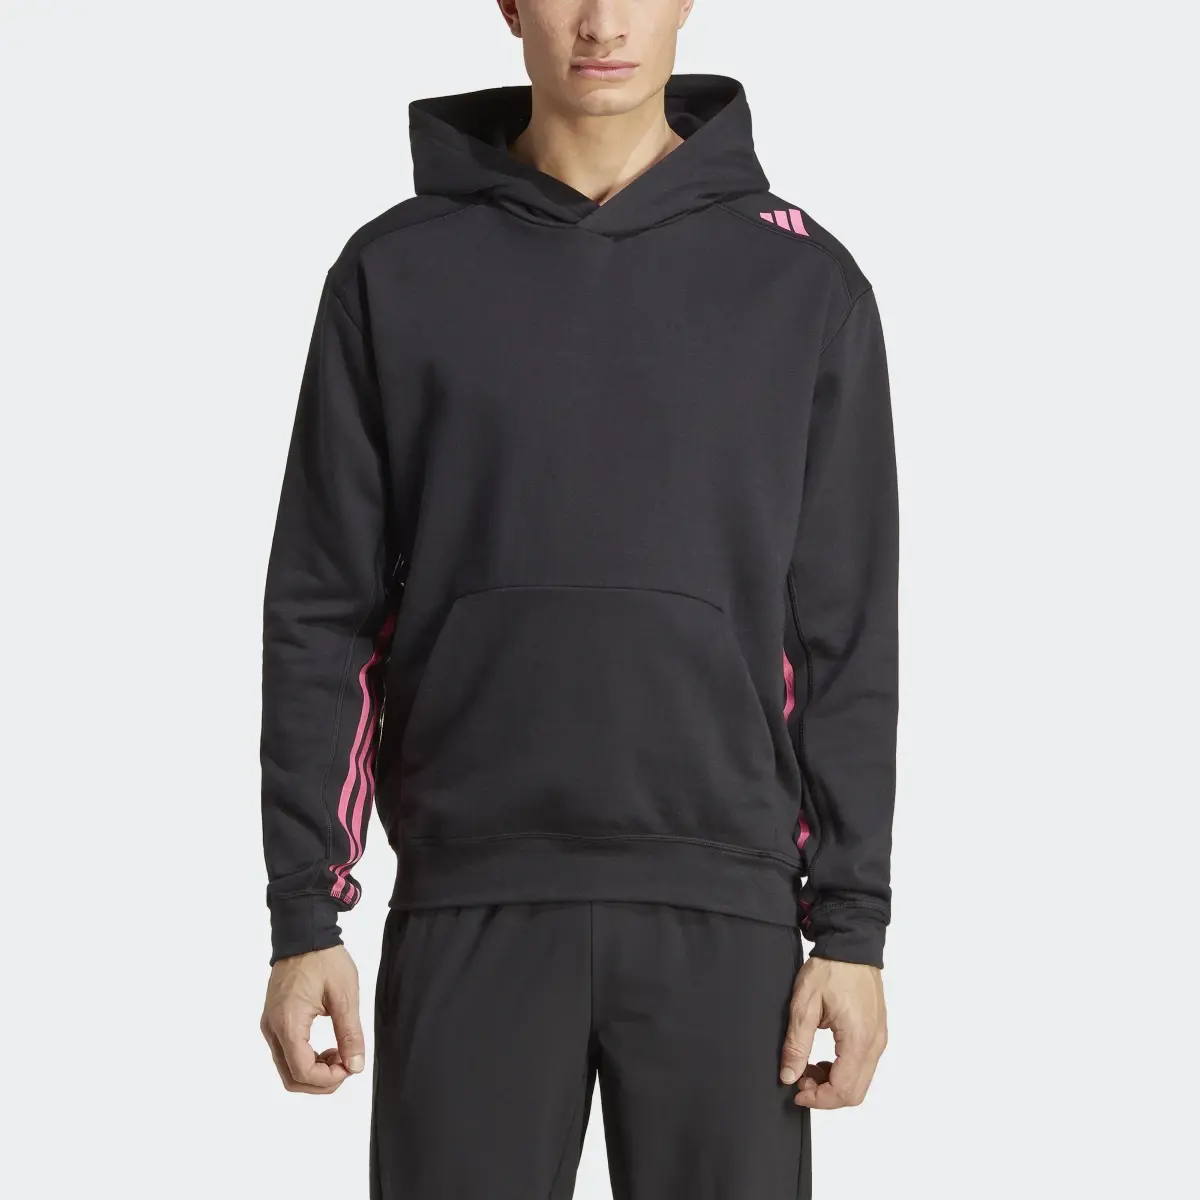 Adidas HIIT Hoodie Curated By Cody Rigsby. 1